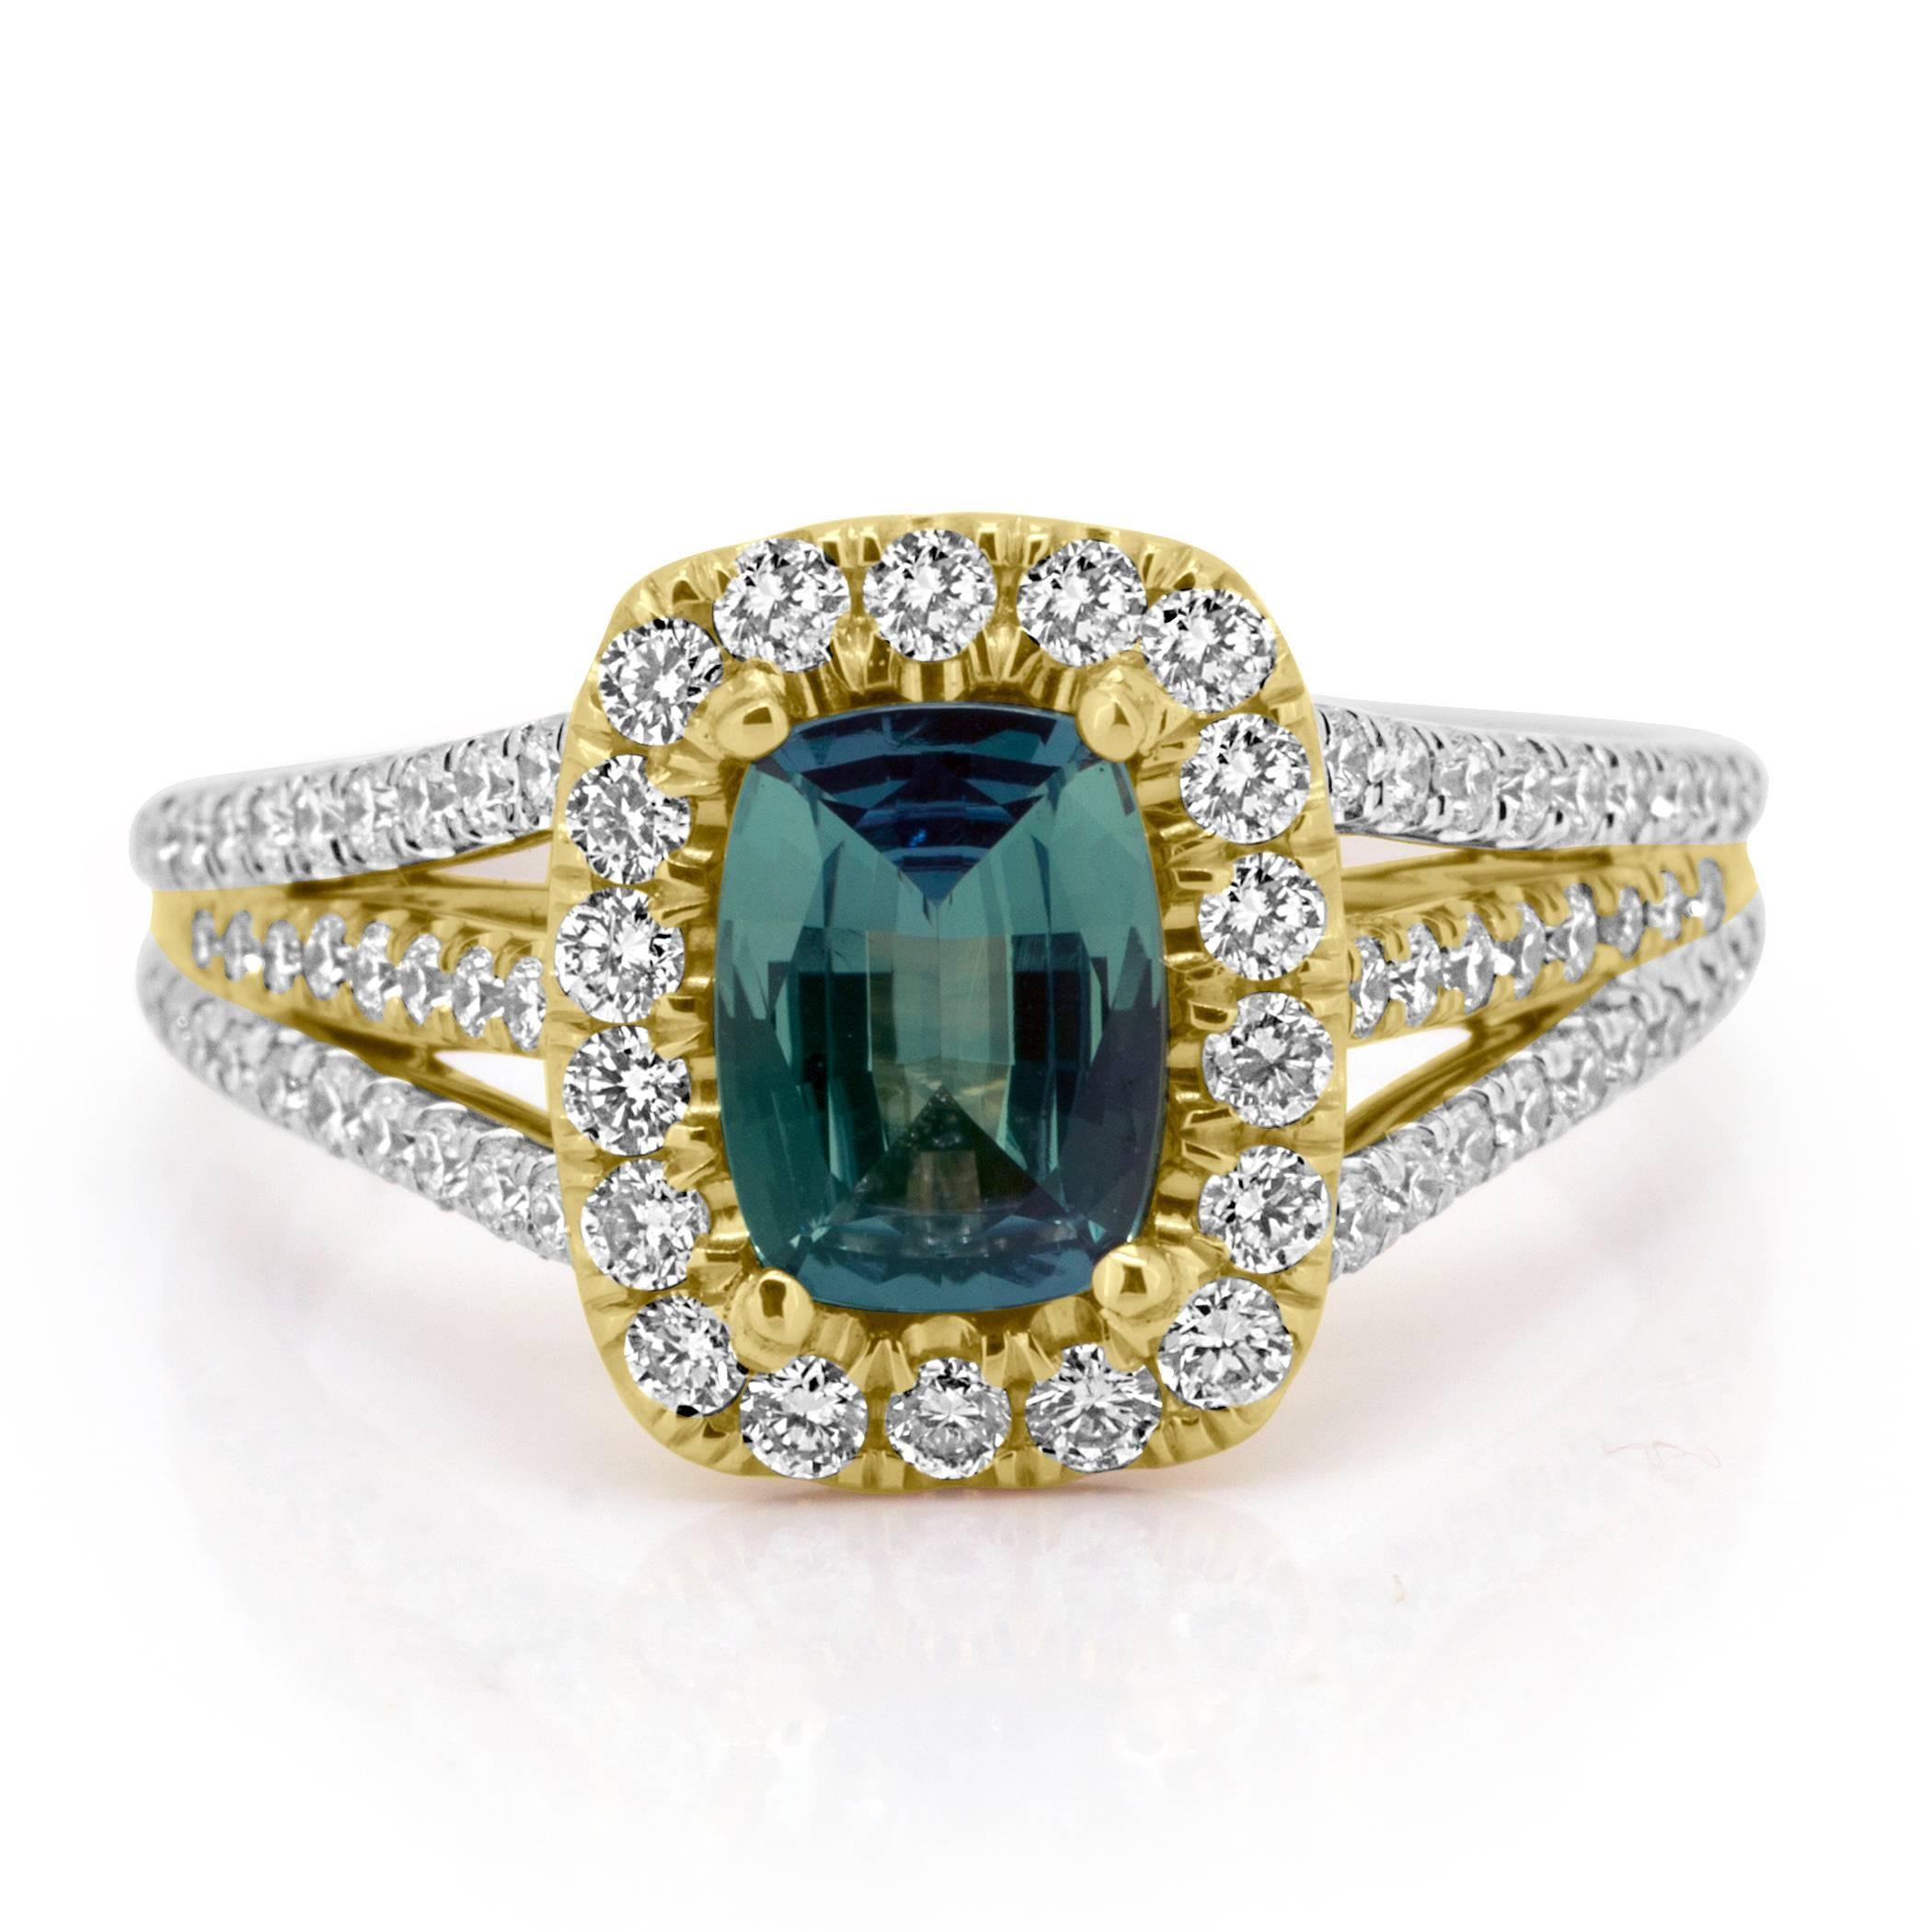 GIA Certified 1.01 Carat Alexandrite Cushion with Good Color Change encircled in a Halo of White Diamond 74 stones 0.73 Carat in Three Row Shank 18K White and Yellow Gold Ring . MADE IN USA.